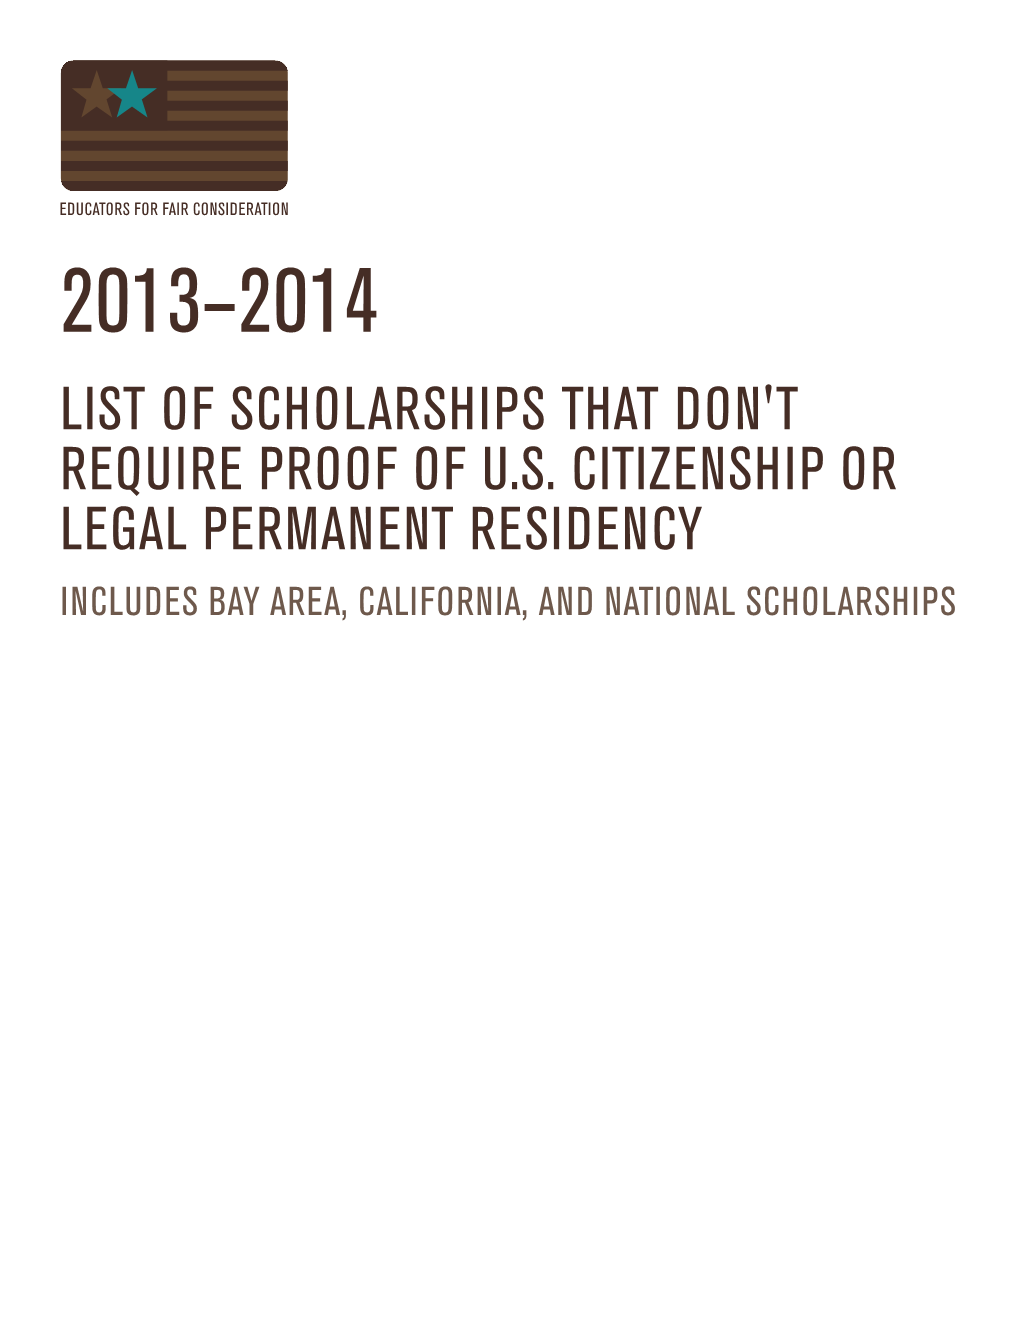 List of Scholarships That Don't Require Proof of Us Citizenship Or Legal